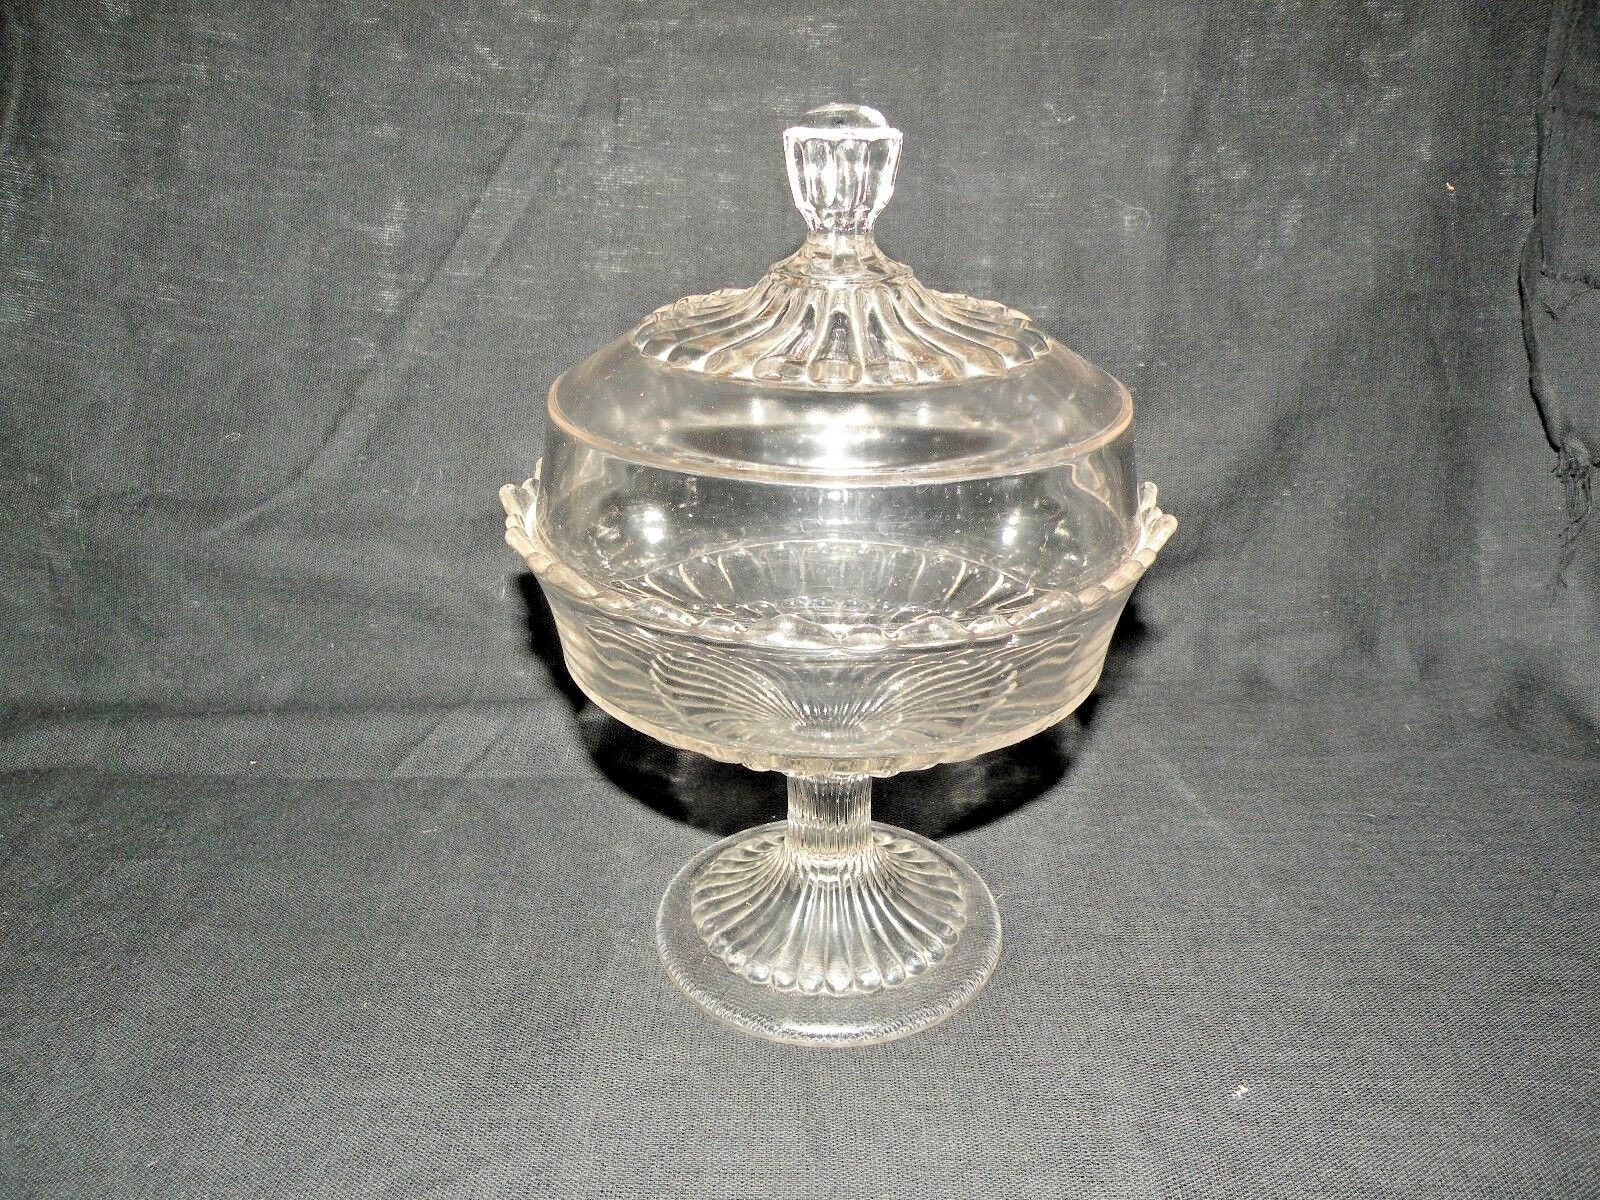 ANTIQUE CLEAR GLASS RIBBED WEDDING COMPOTE SCALLOPED EDGES WITH LID 1900 EAPG